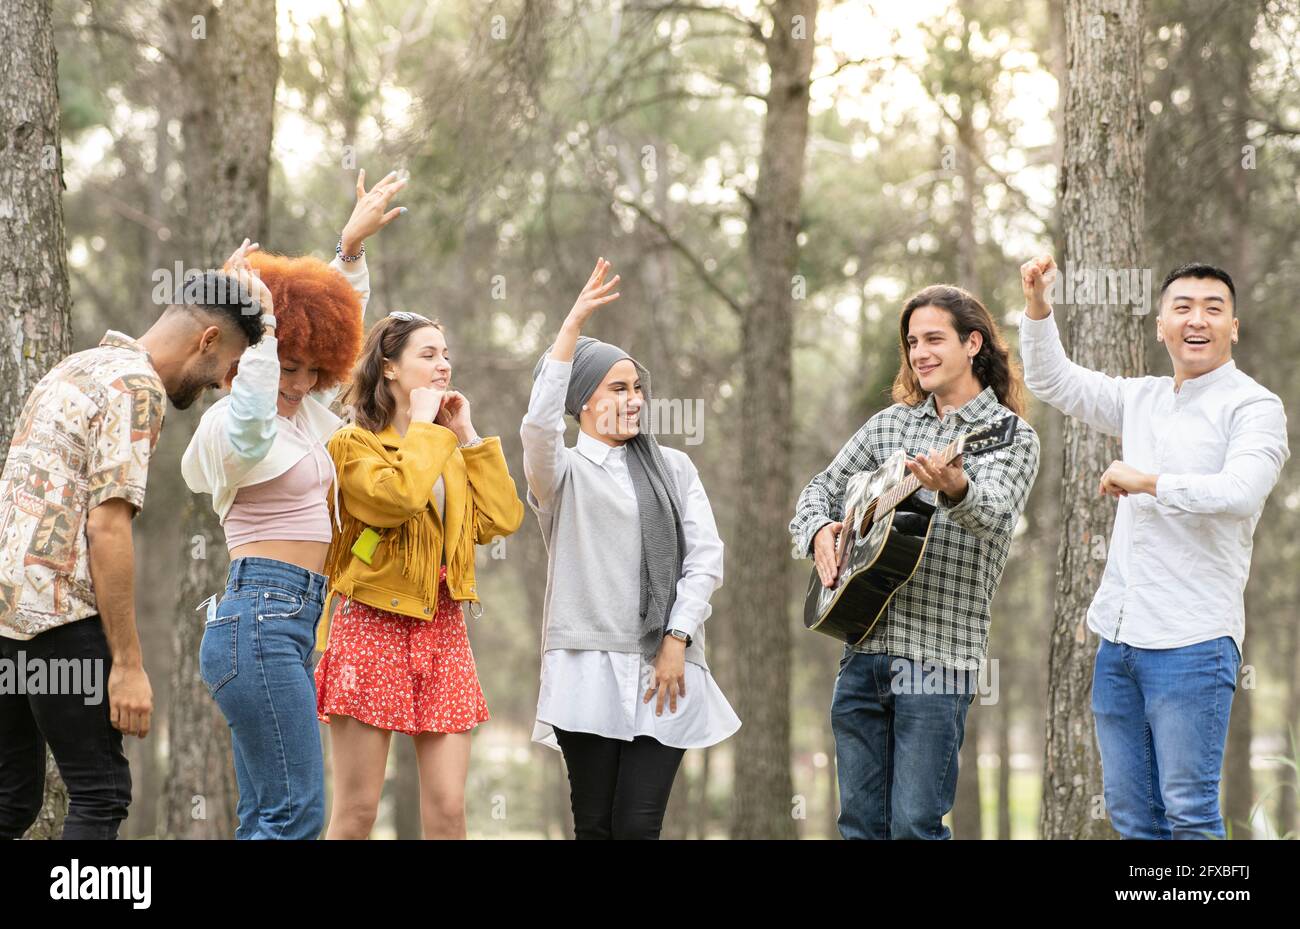 Cheerful multi-ethnic female and male friends dancing and enjoying in forest Stock Photo